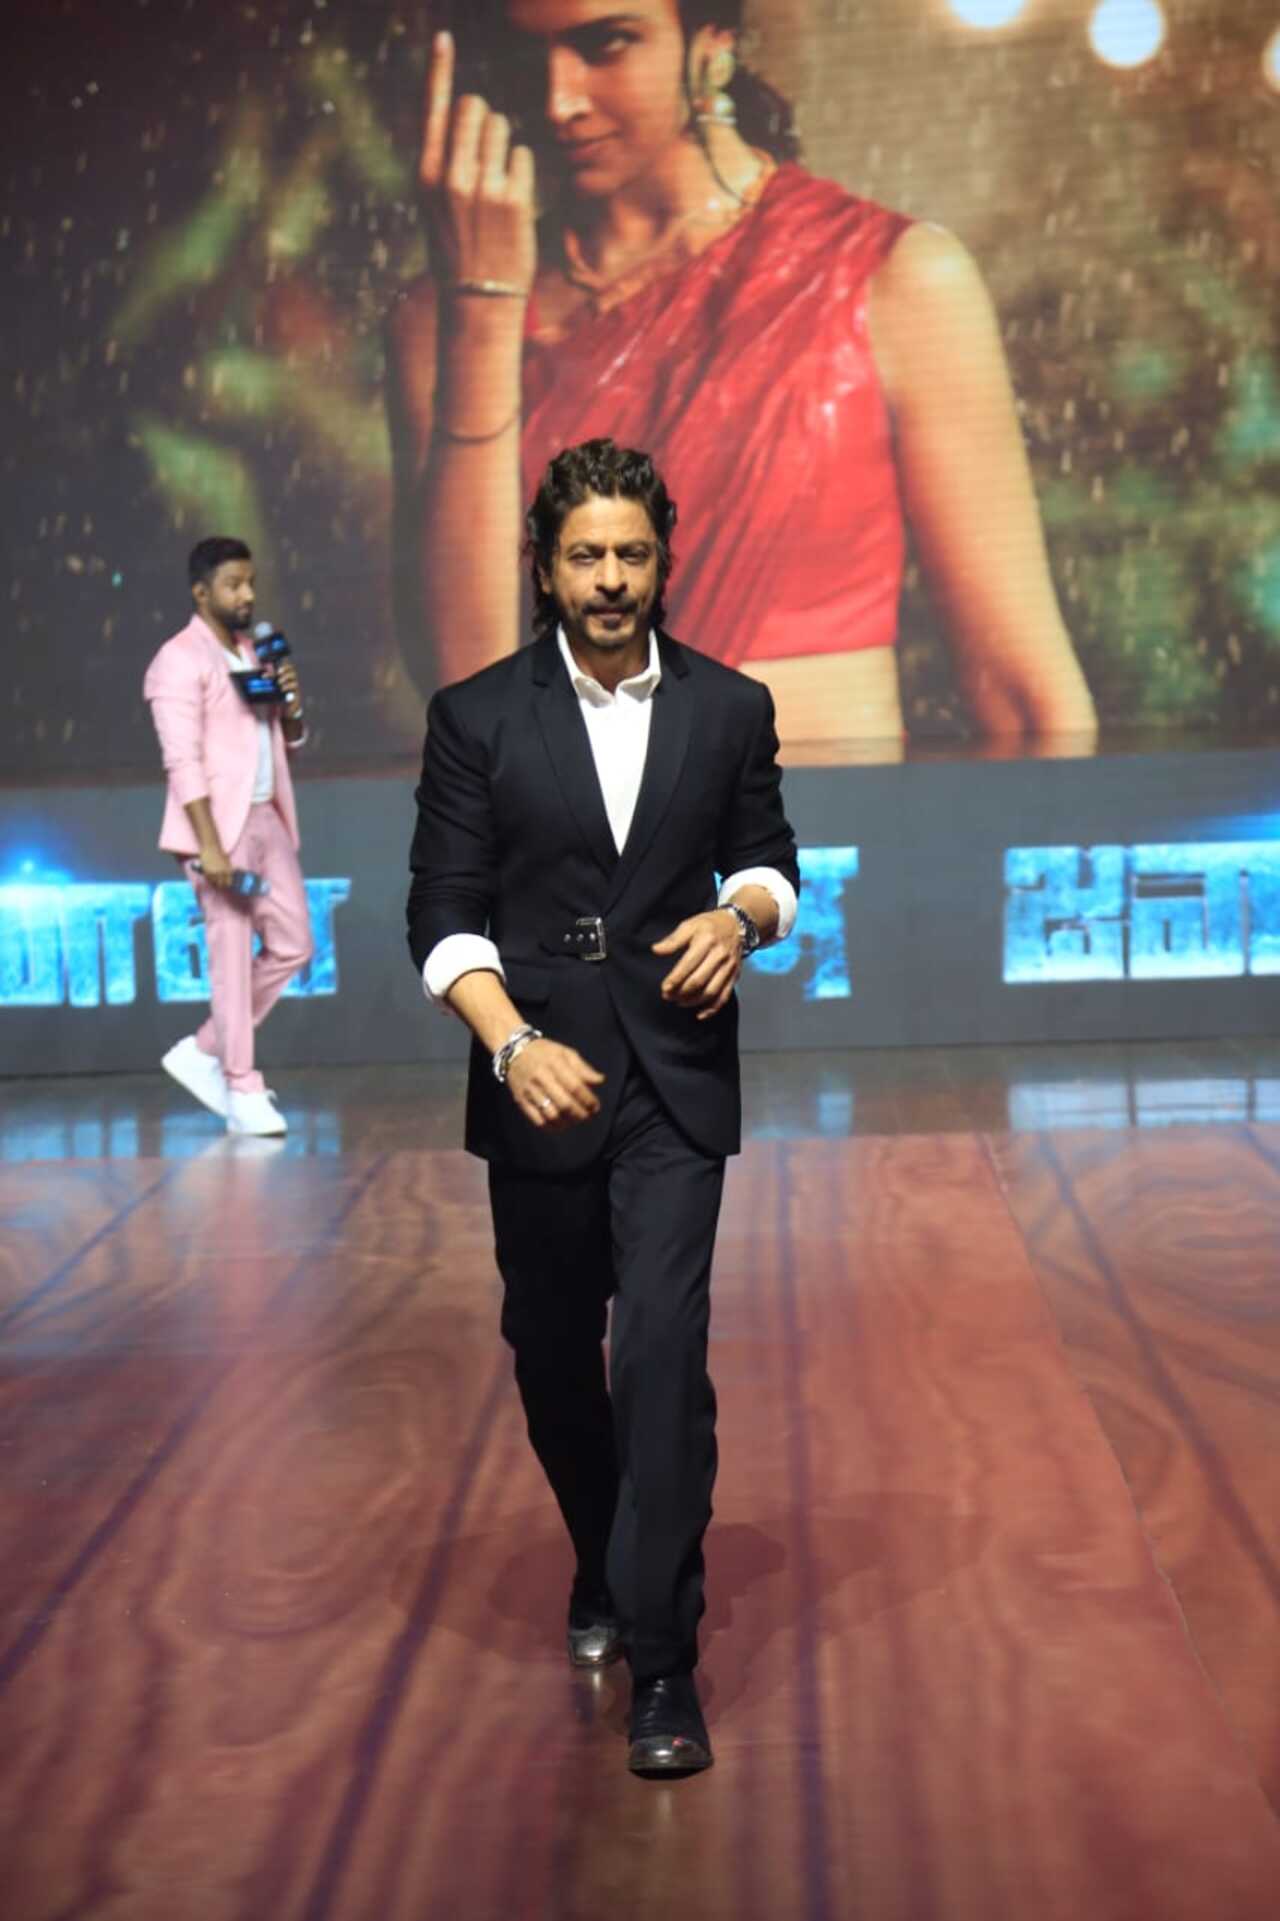 Shah Rukh Khan looked dapper for the success meet in a black suit and a hairdo that reminded fans of his Don days